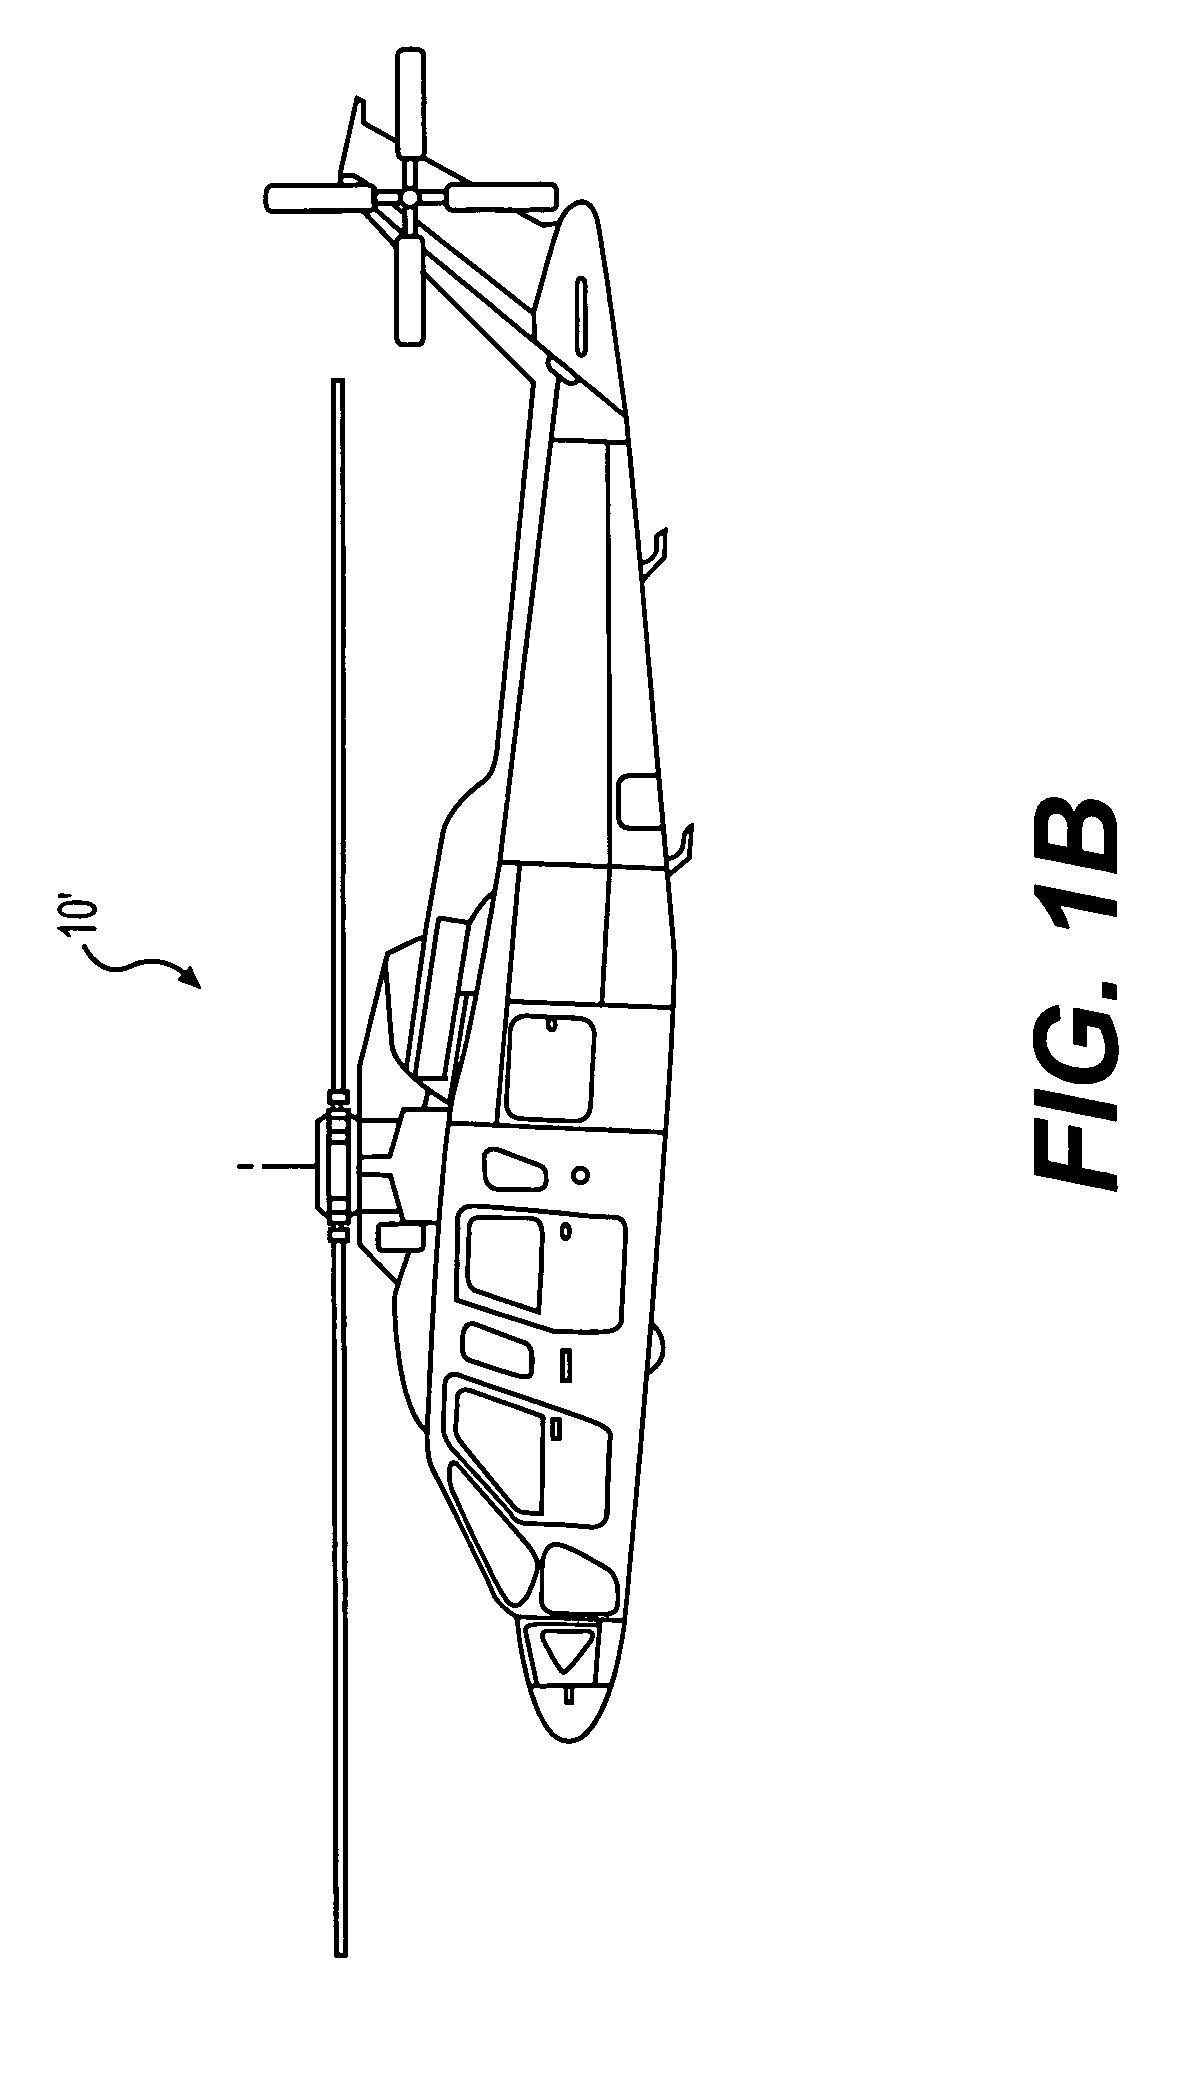 Airfoil for a helicopter rotor blade